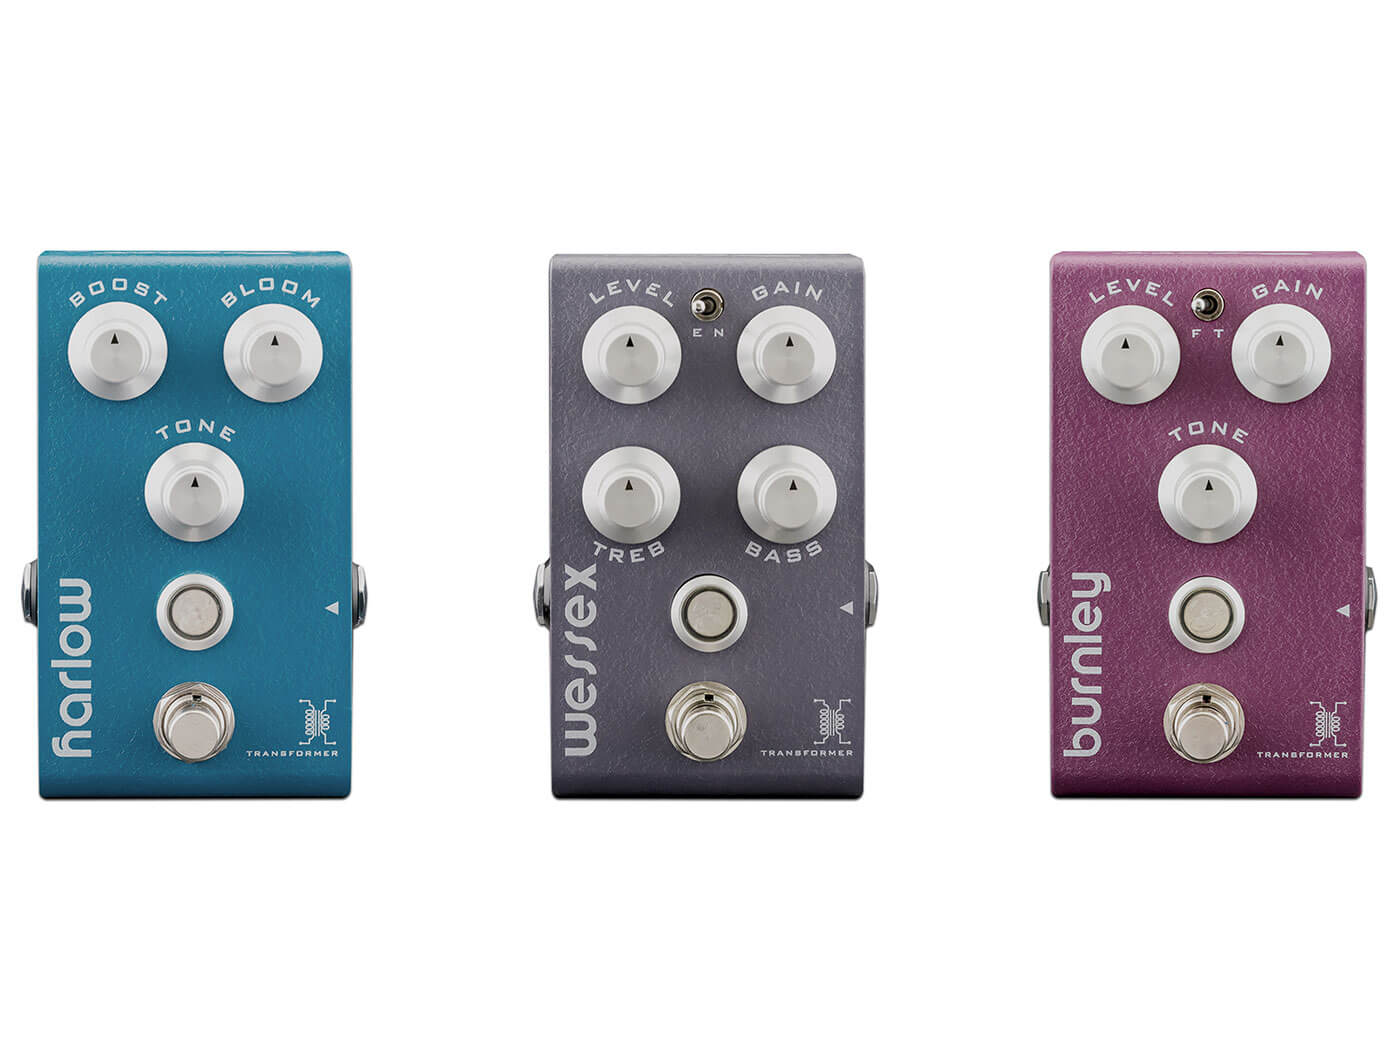 Bogner's new V2 pedals featuring the Custom Audio Transformer